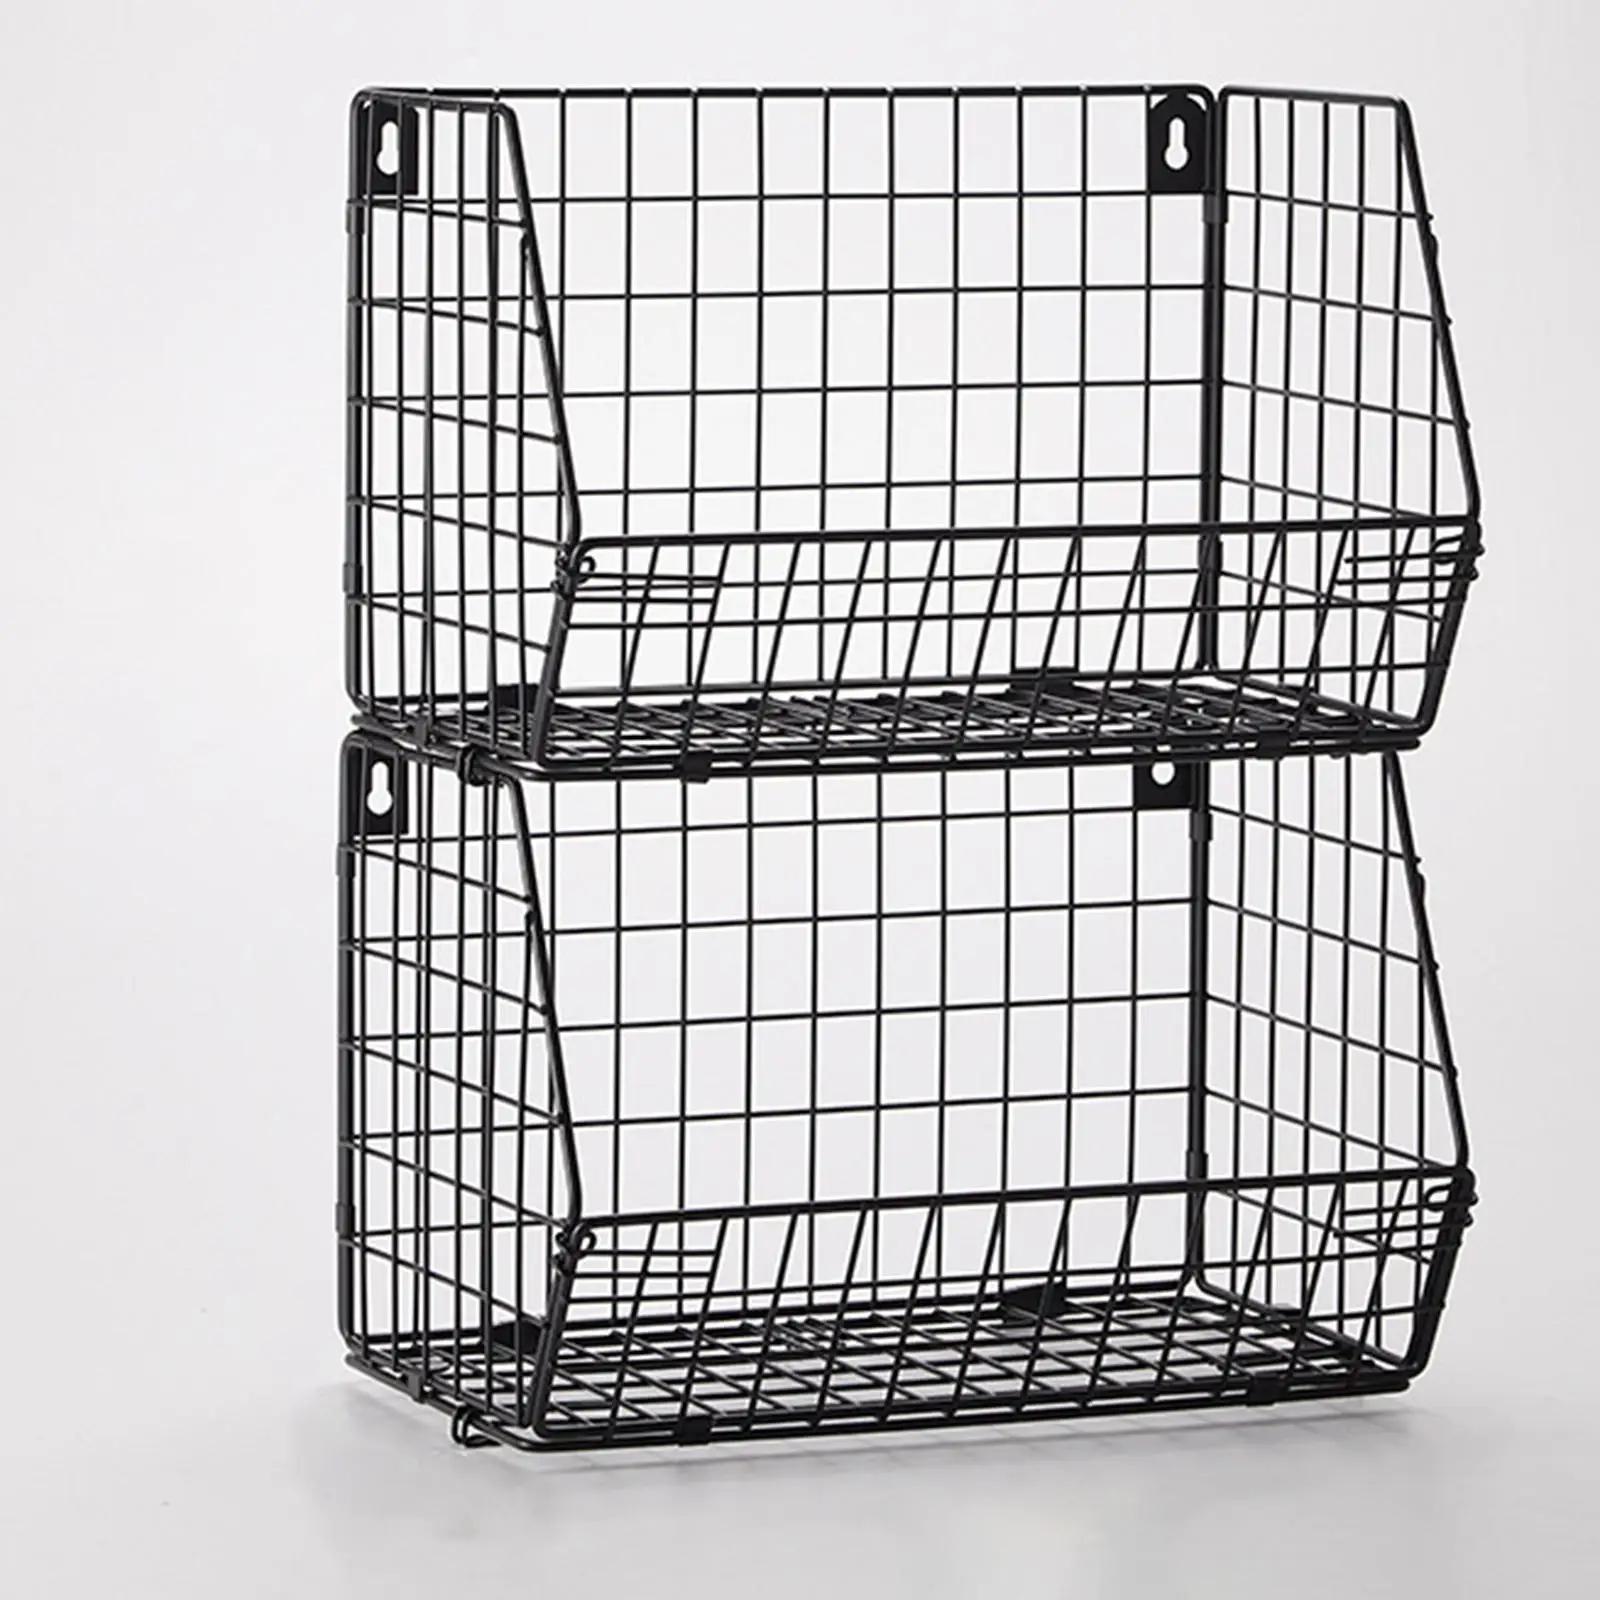 Foldable Closet Organizer Cabinet Wire Storage Basket Bins for Laundry Room